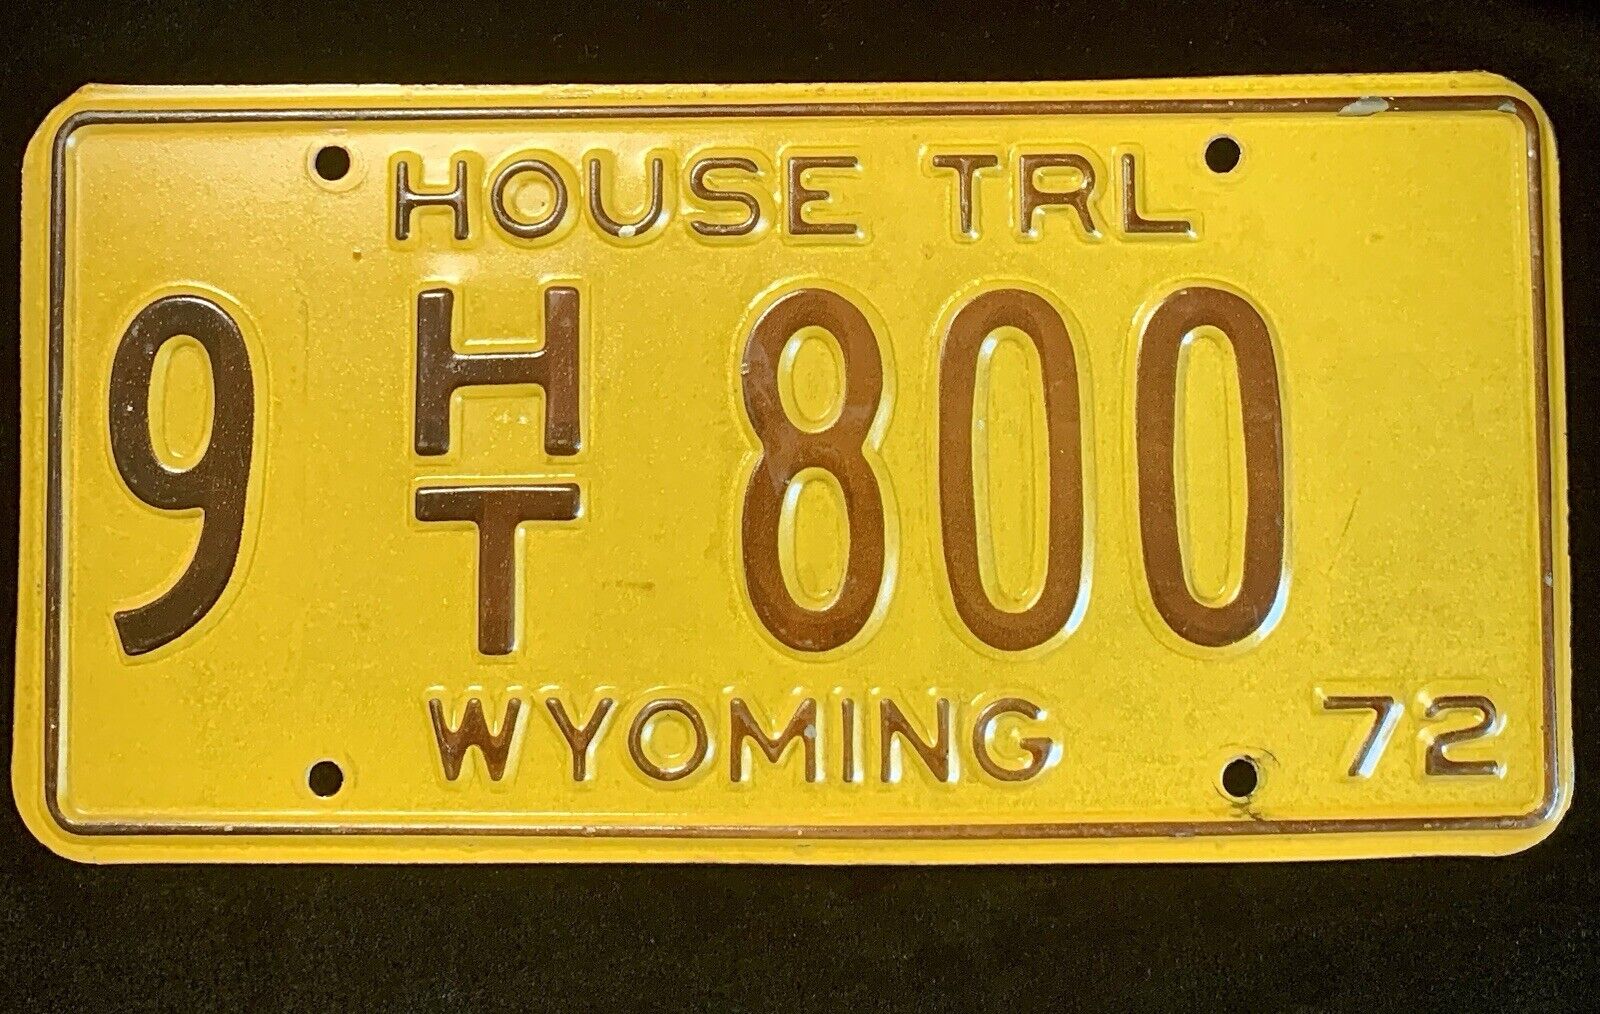 Wyoming Vintage (1972) License Plate House Trailer *Very Cool 